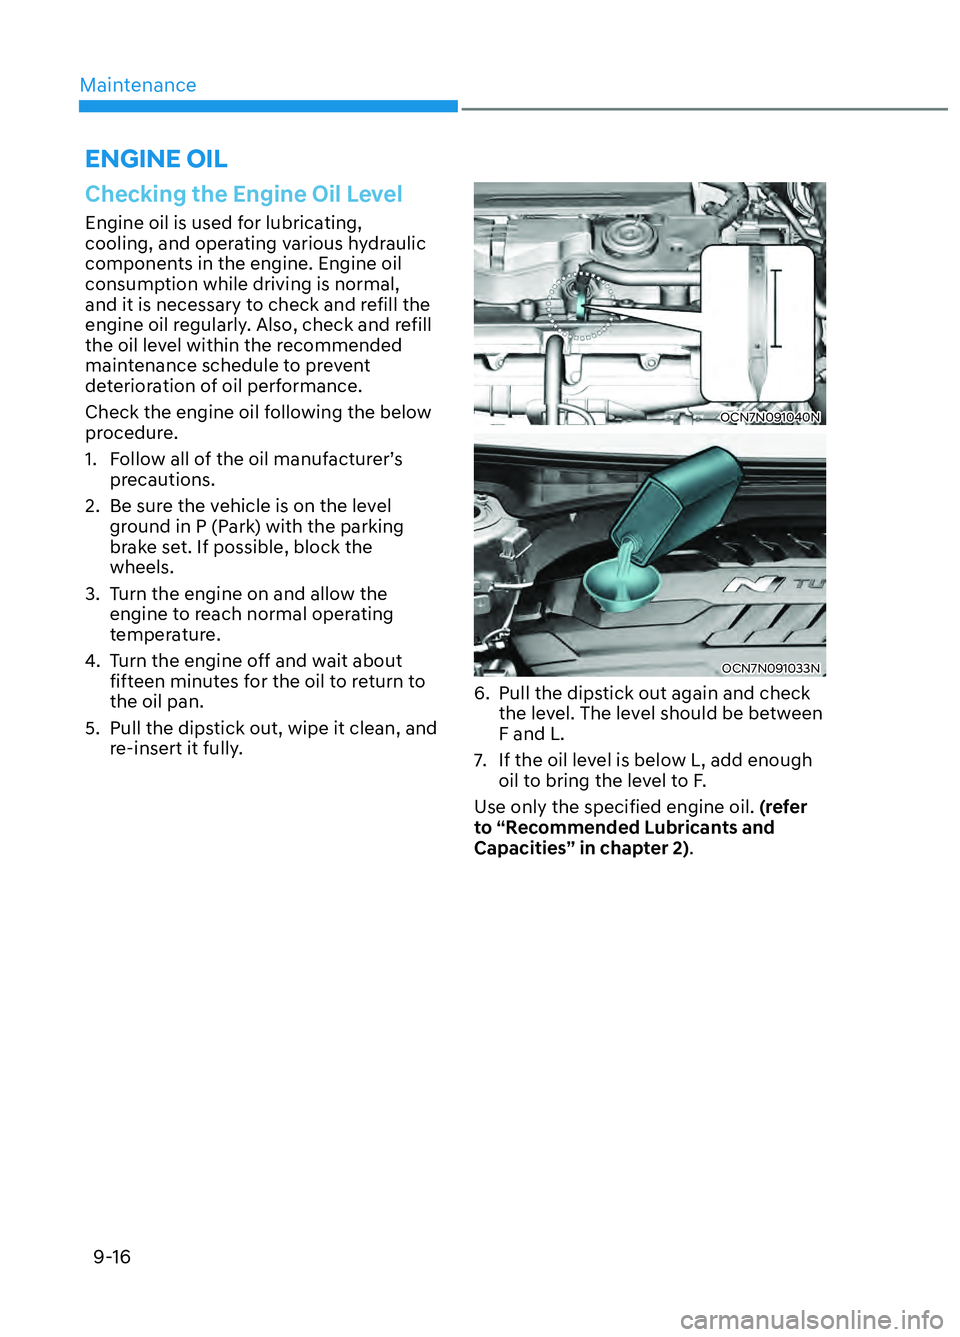 HYUNDAI ELANTRA N 2022  Owners Manual Maintenance9-16
ENGINE OIL
Checking the Engine Oil Level
Engine oil is used for lubricating, 
cooling, and operating various hydraulic 
components in the engine. Engine oil 
consumption while driving 